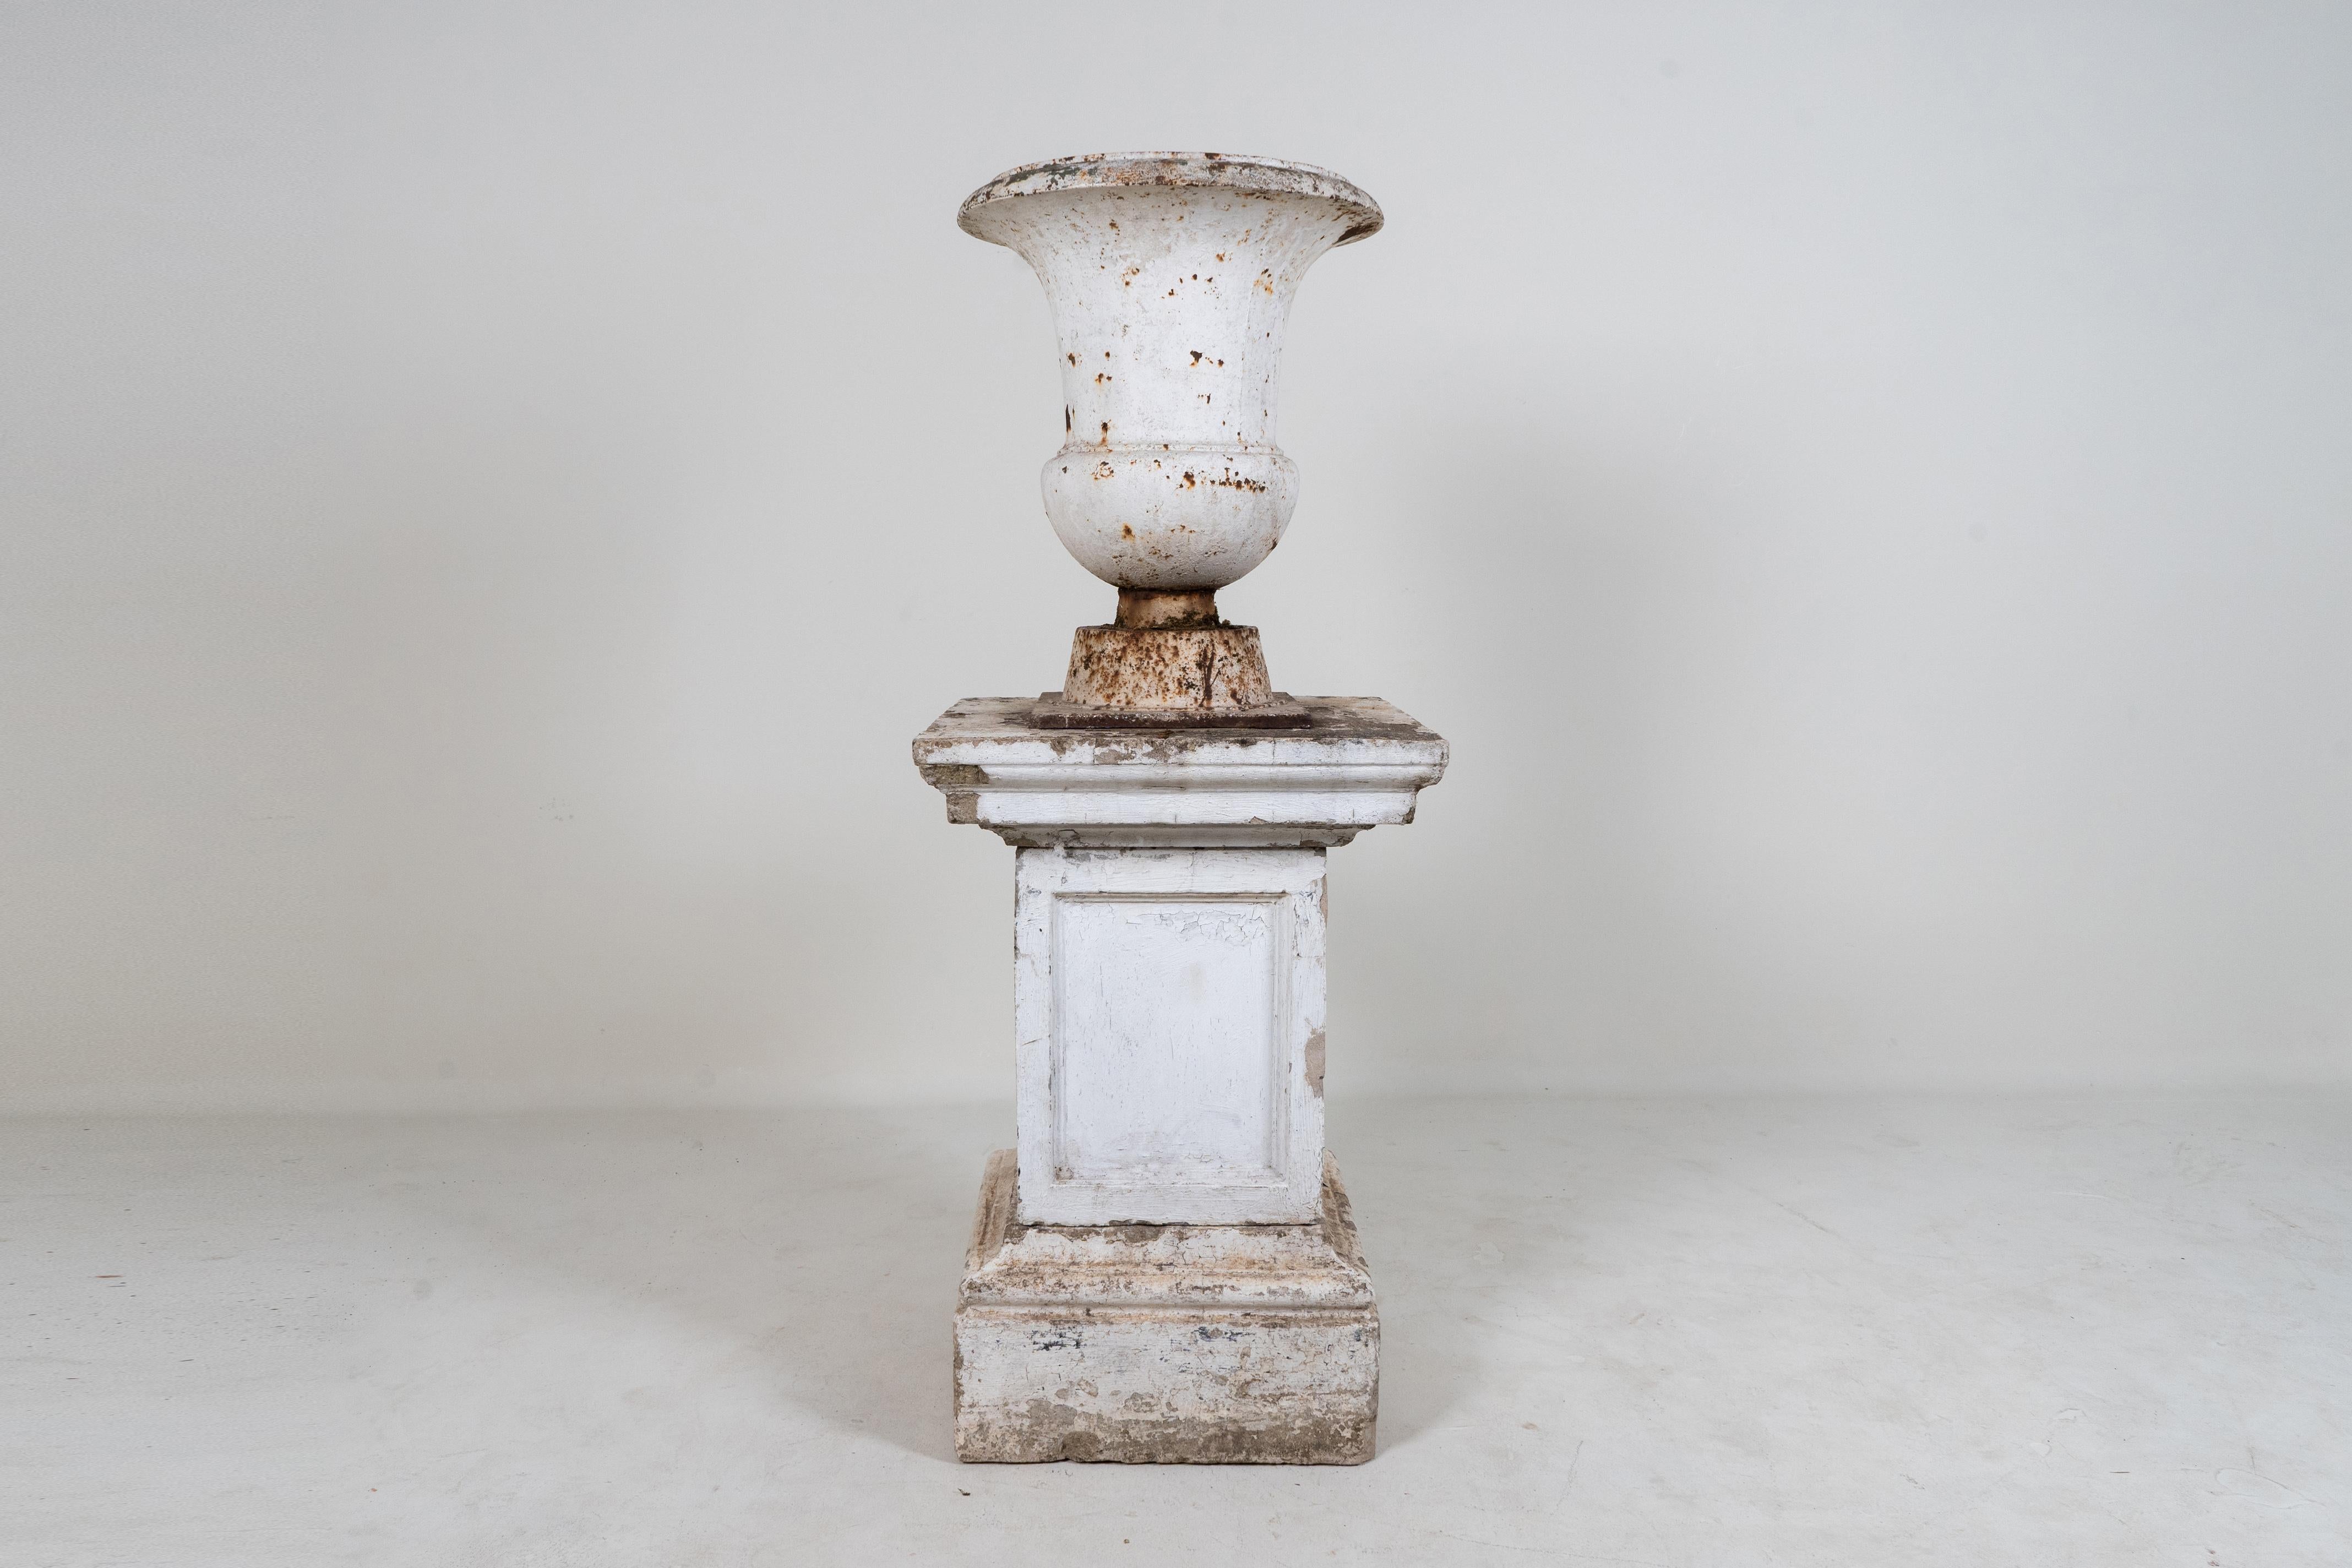 A French cast iron Provençale jardinière from the early 20th century, with ancient Greek design and minimal decoration. This bell-shaped krater features a large, unadorned lip, overhanging the smooth belly, standing on a simple square base. adorned